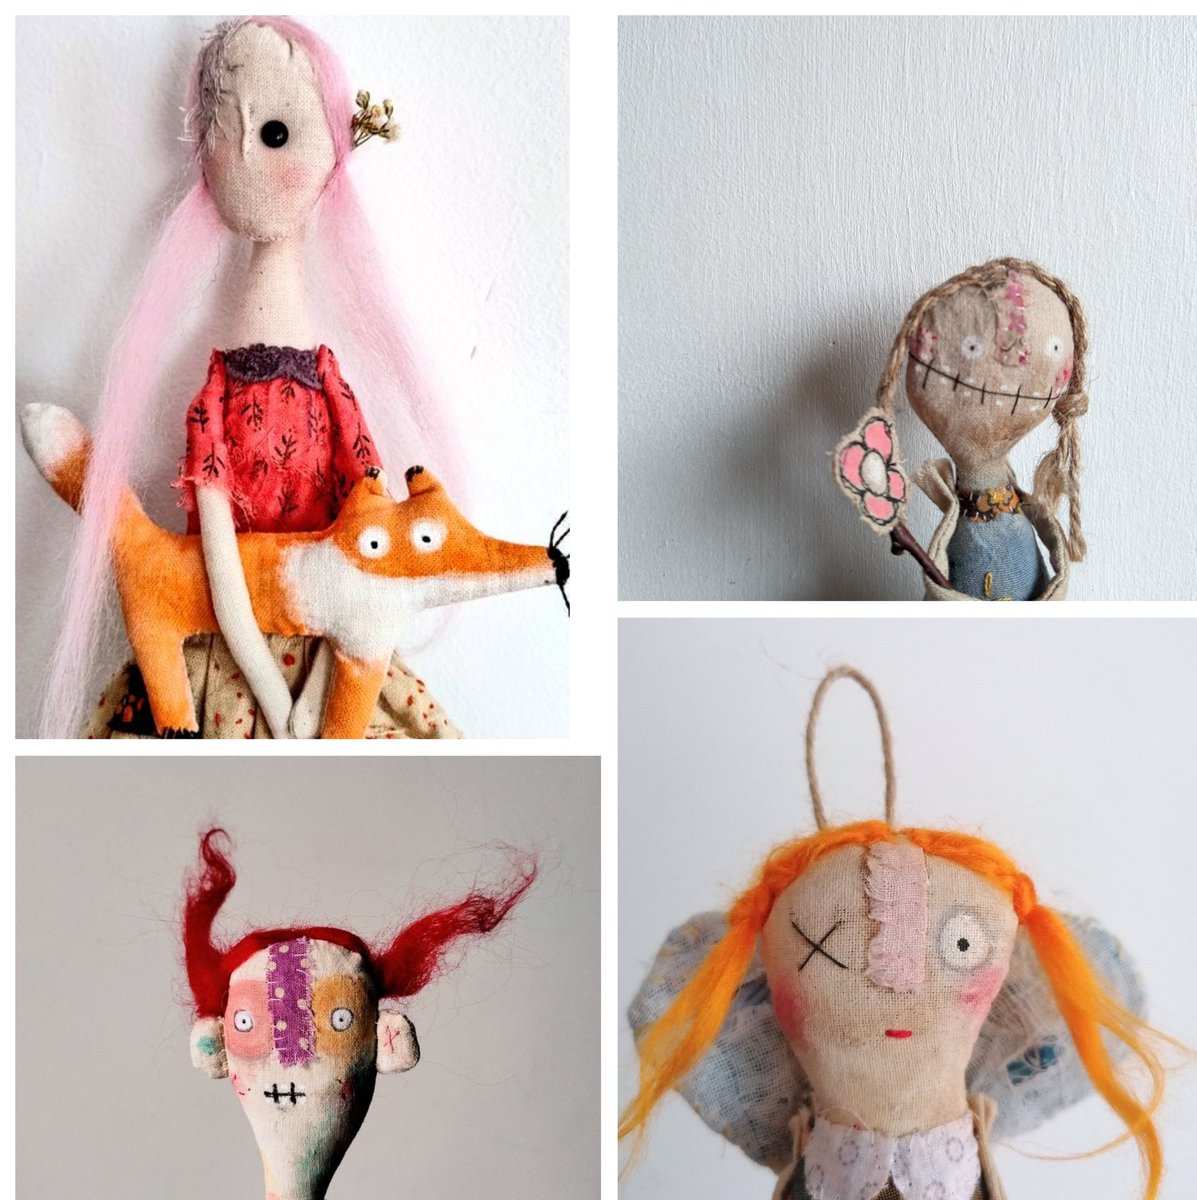 Finally Friday morning #earlybiz 🎉 Here are a few of my little ladies currently available on my website. Each character is unique and designed to look wonderfully weird and perfectly imperfect. littlebirdofparadise.bigcartel.com #mhhsbd #CraftBizParty